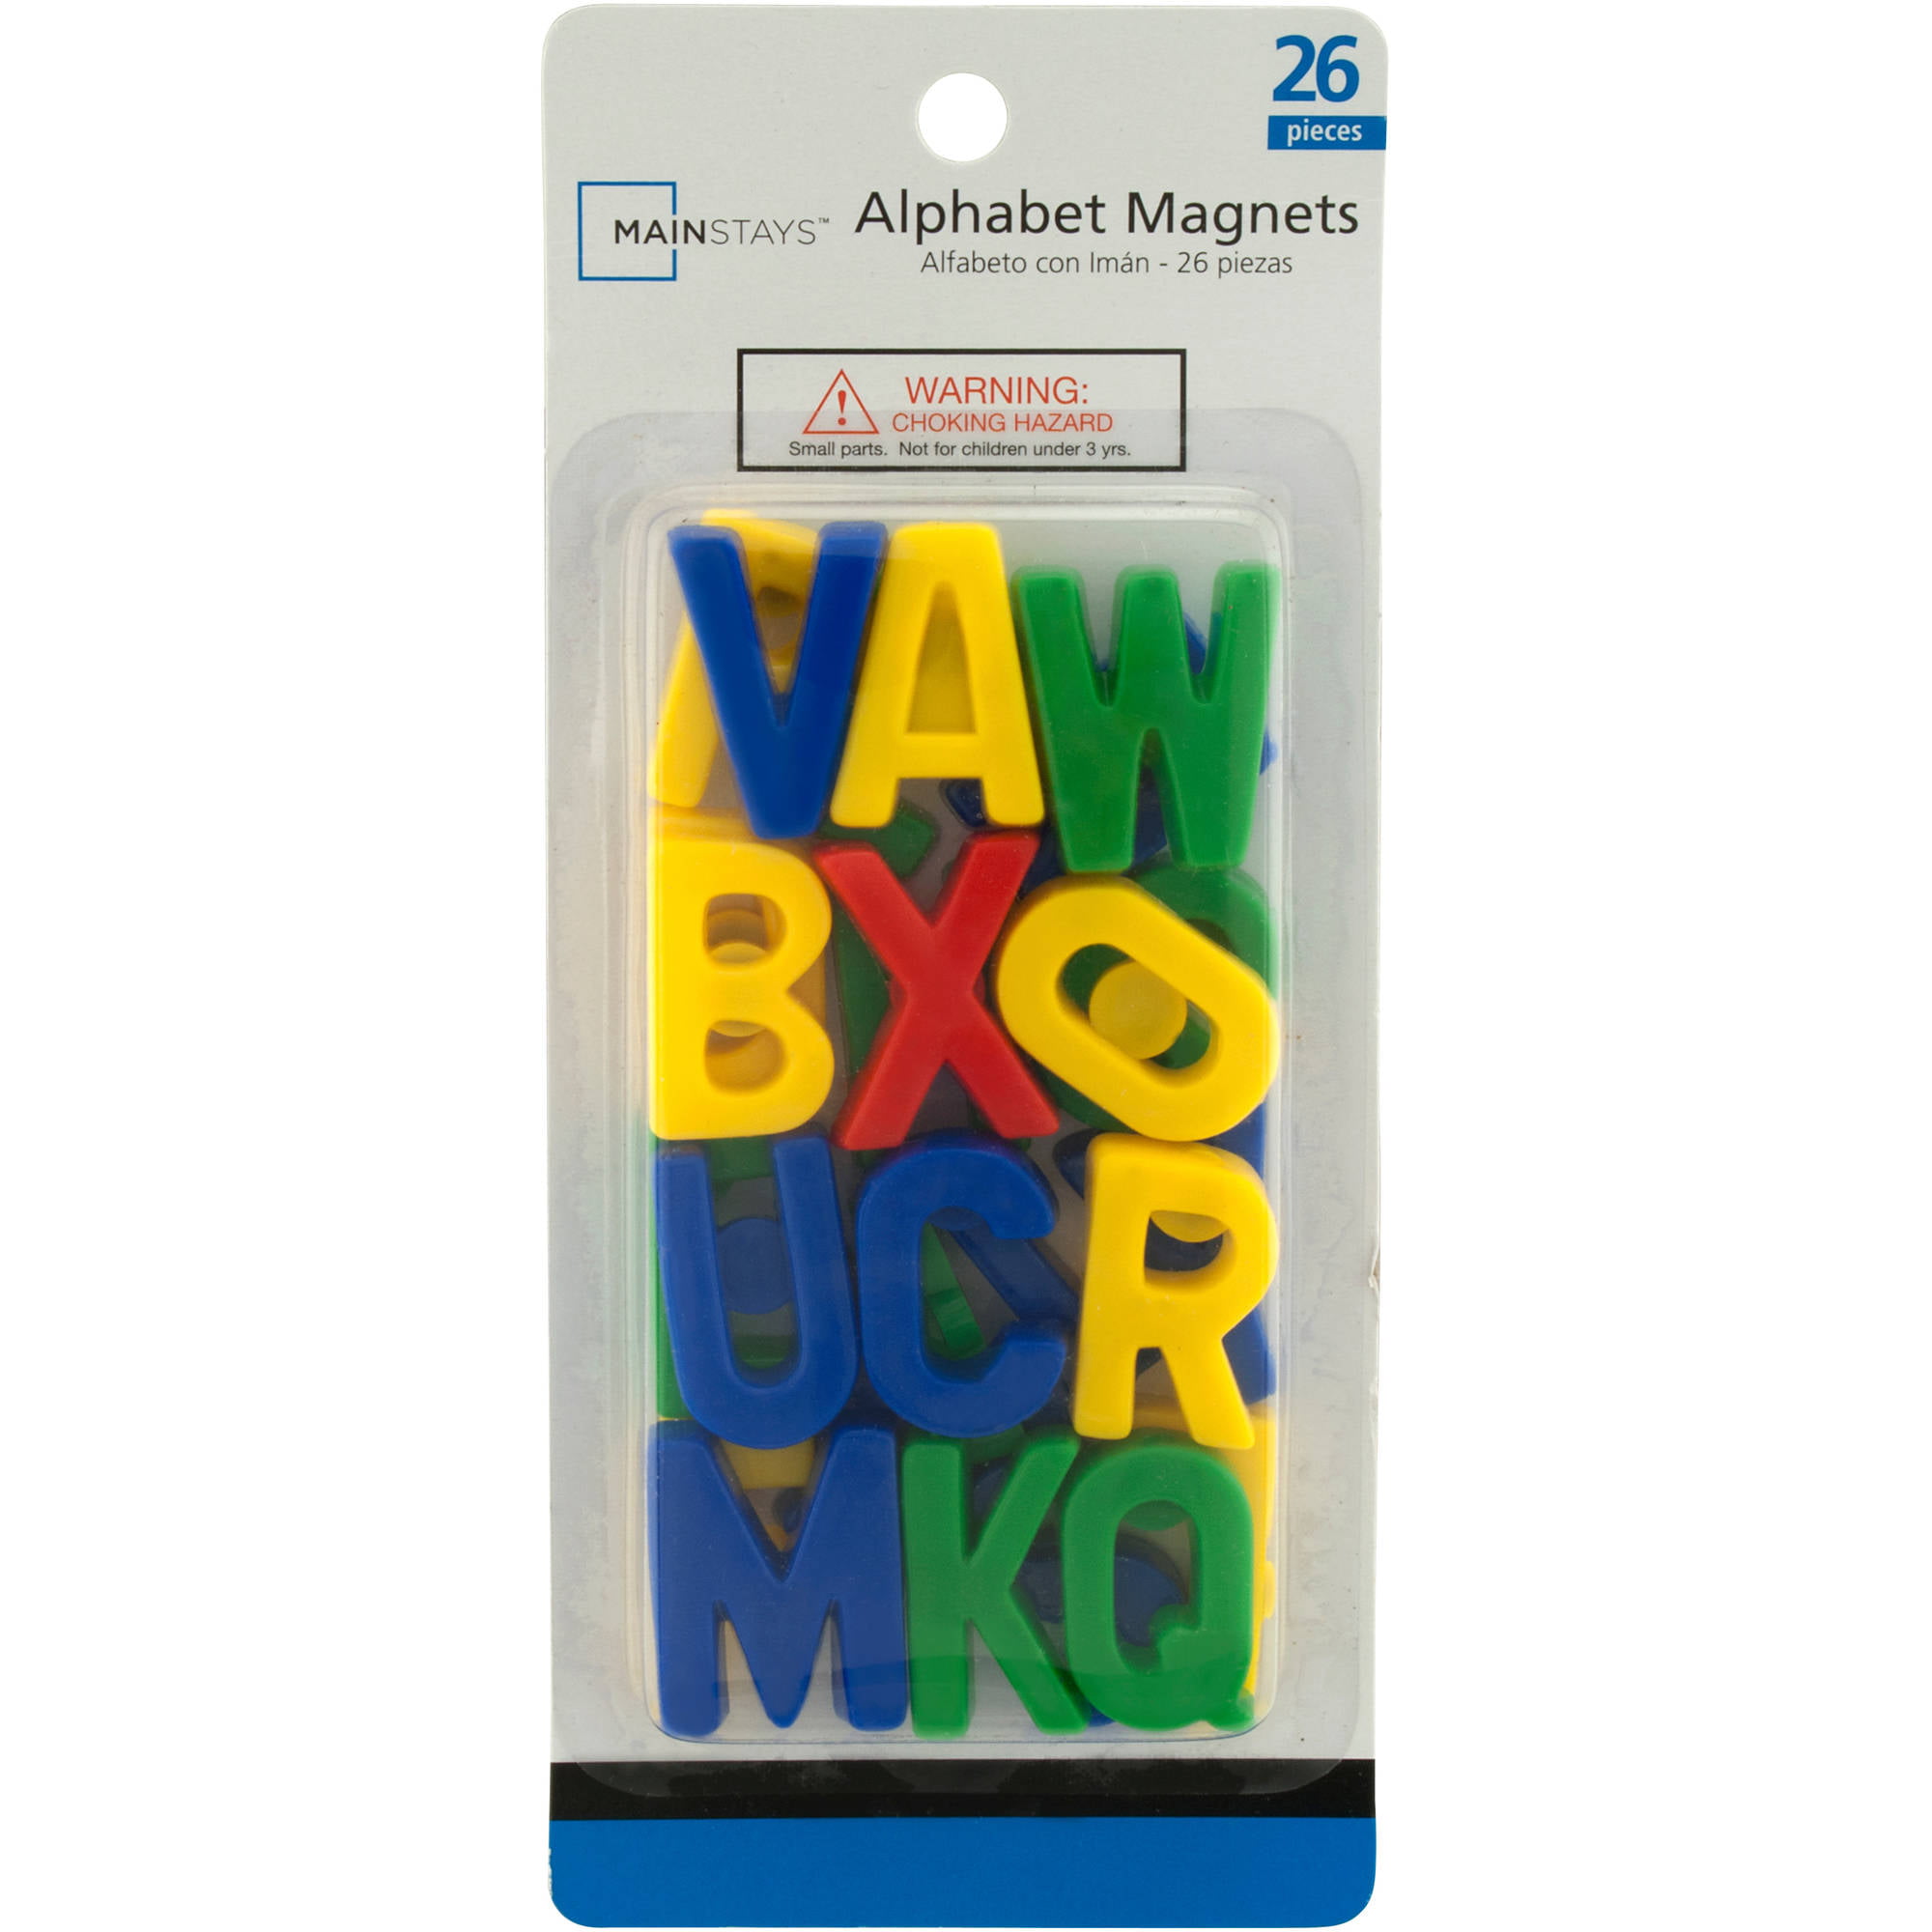 Mainstays ABC Magnets, 26 Piece 